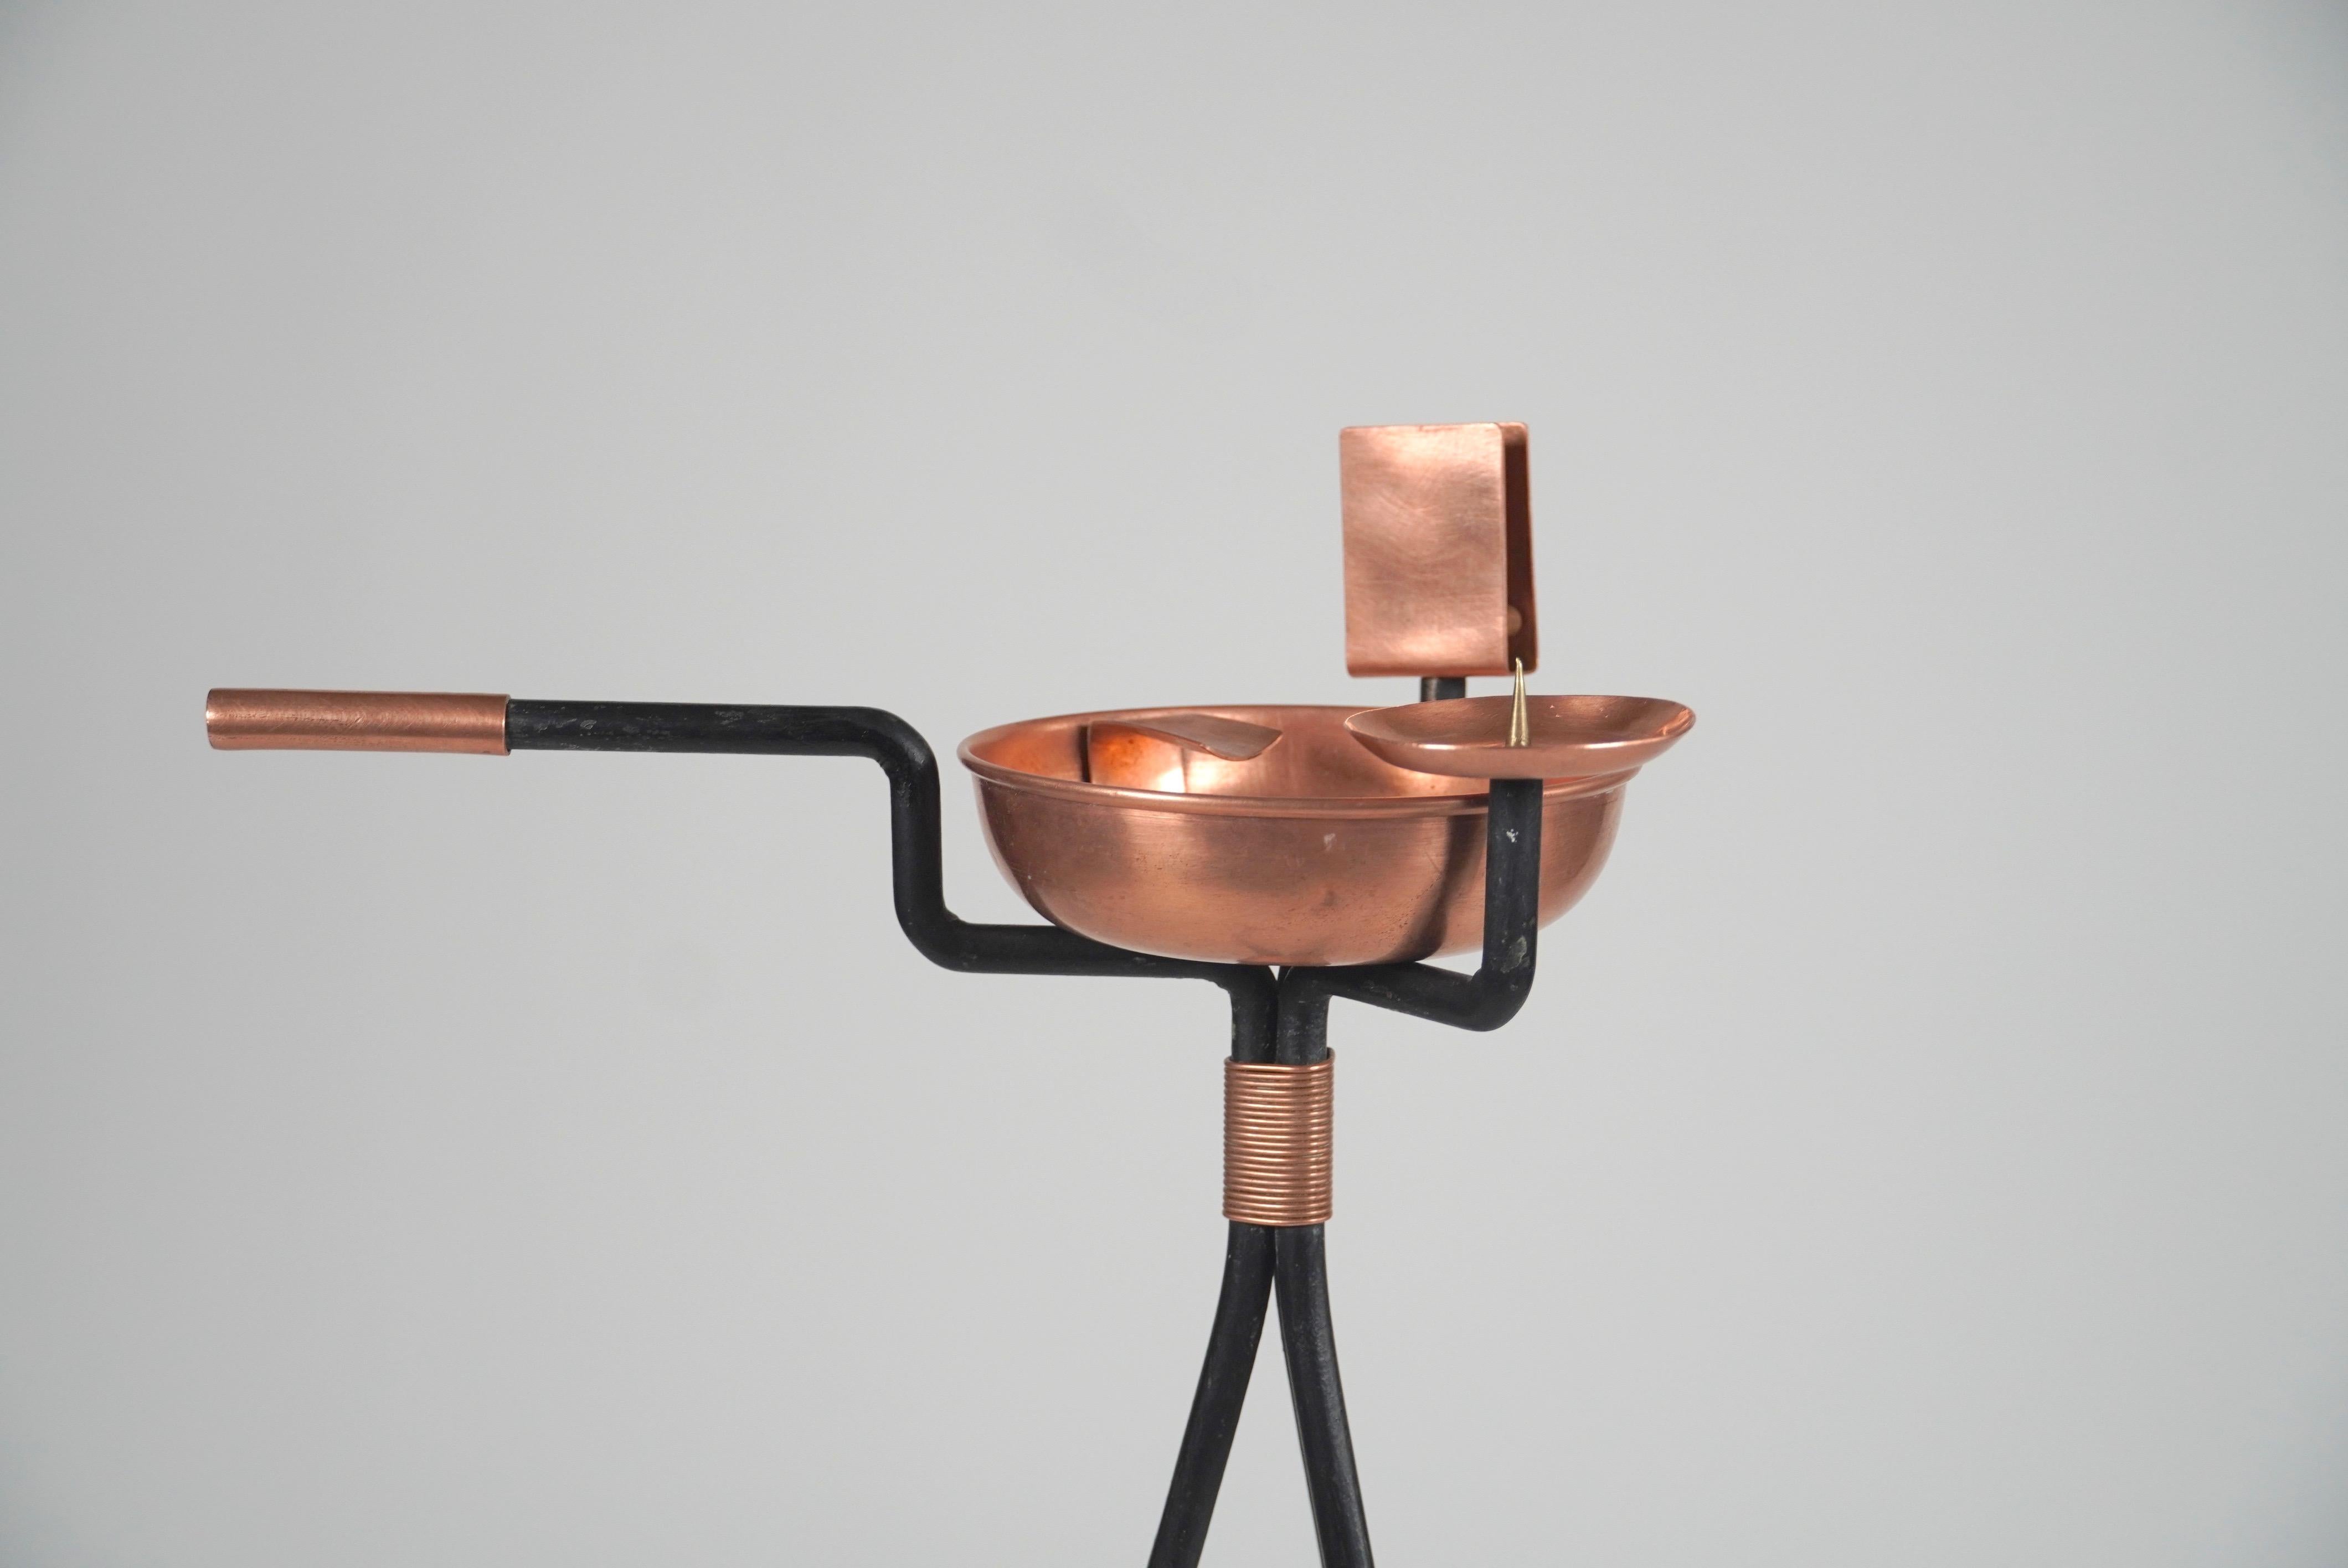 An unusual design in a cigar floor stand ashtray, created out of copper, brass, with a three legged iron base wrapped in copper wire which has a candle holder to relight the cigar and a match box holder to relight the candle. The handle allows the